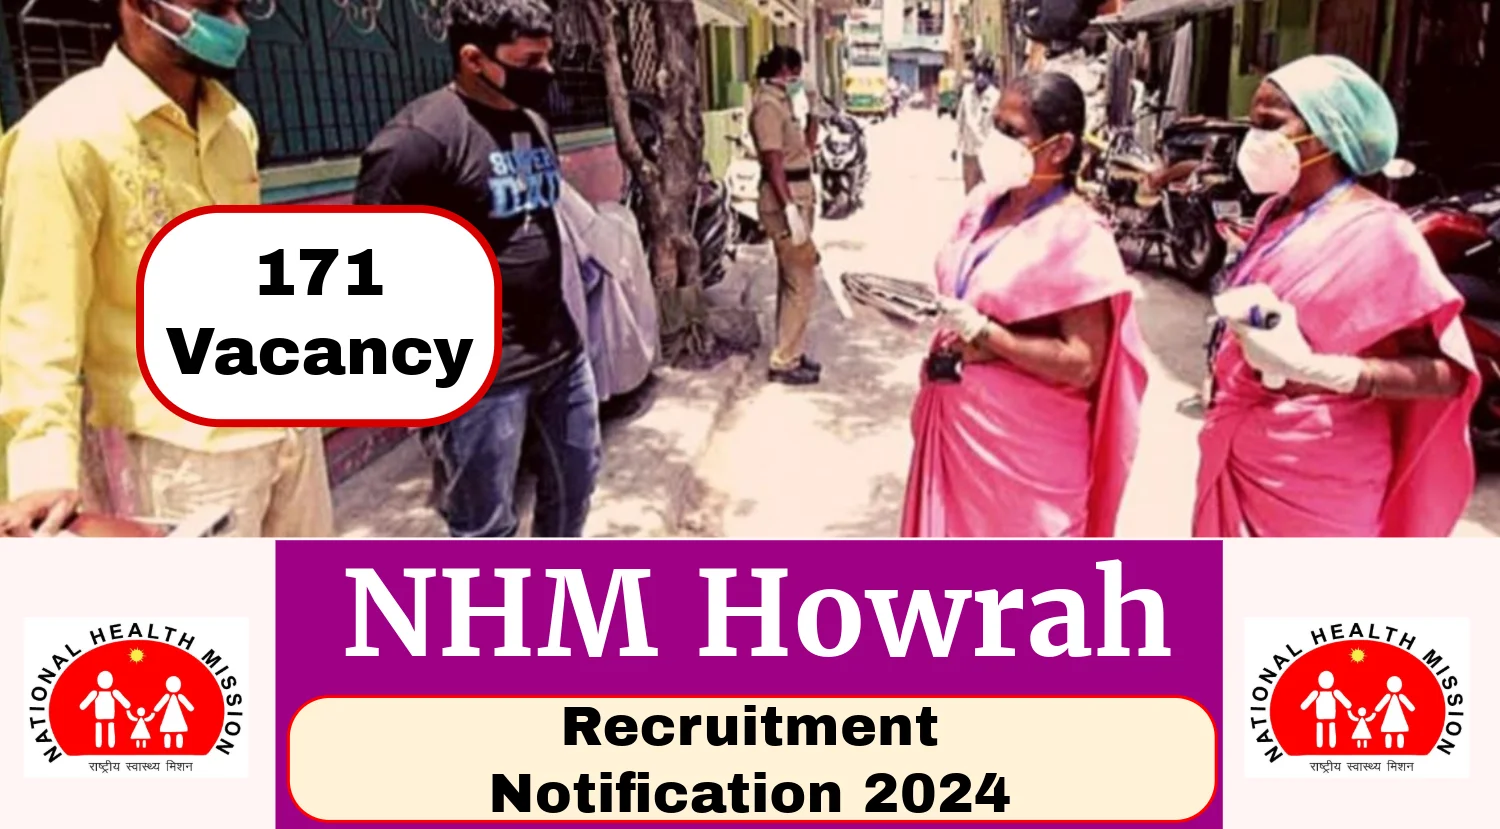 DHFWS Howrah Recruitment 2024 Notification Out for 171 Various Posts, Check NHM Howrah Vacancy, Eligibility and Application Details Now 